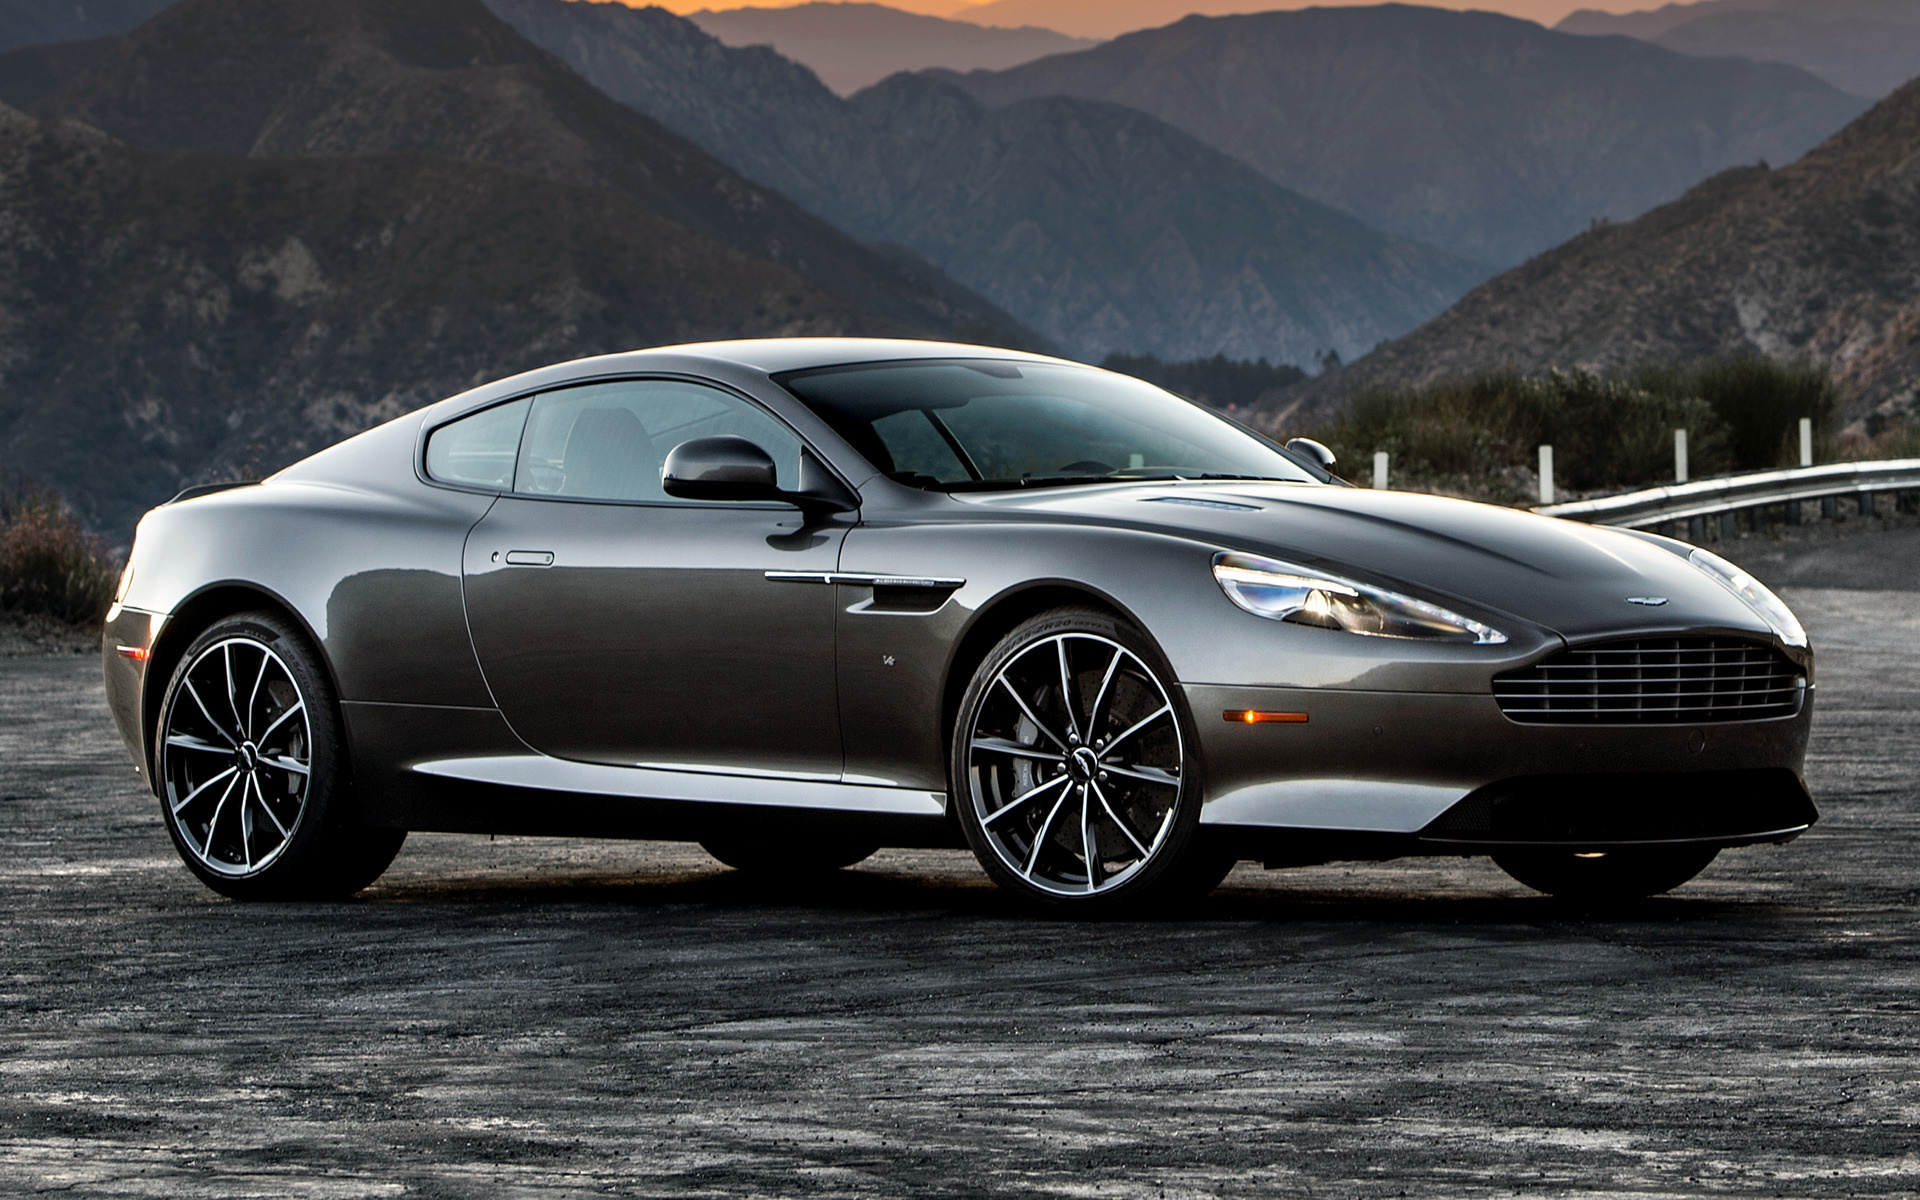 Aston Martin DB9 GT 2016 US Wallpapers and HD Images